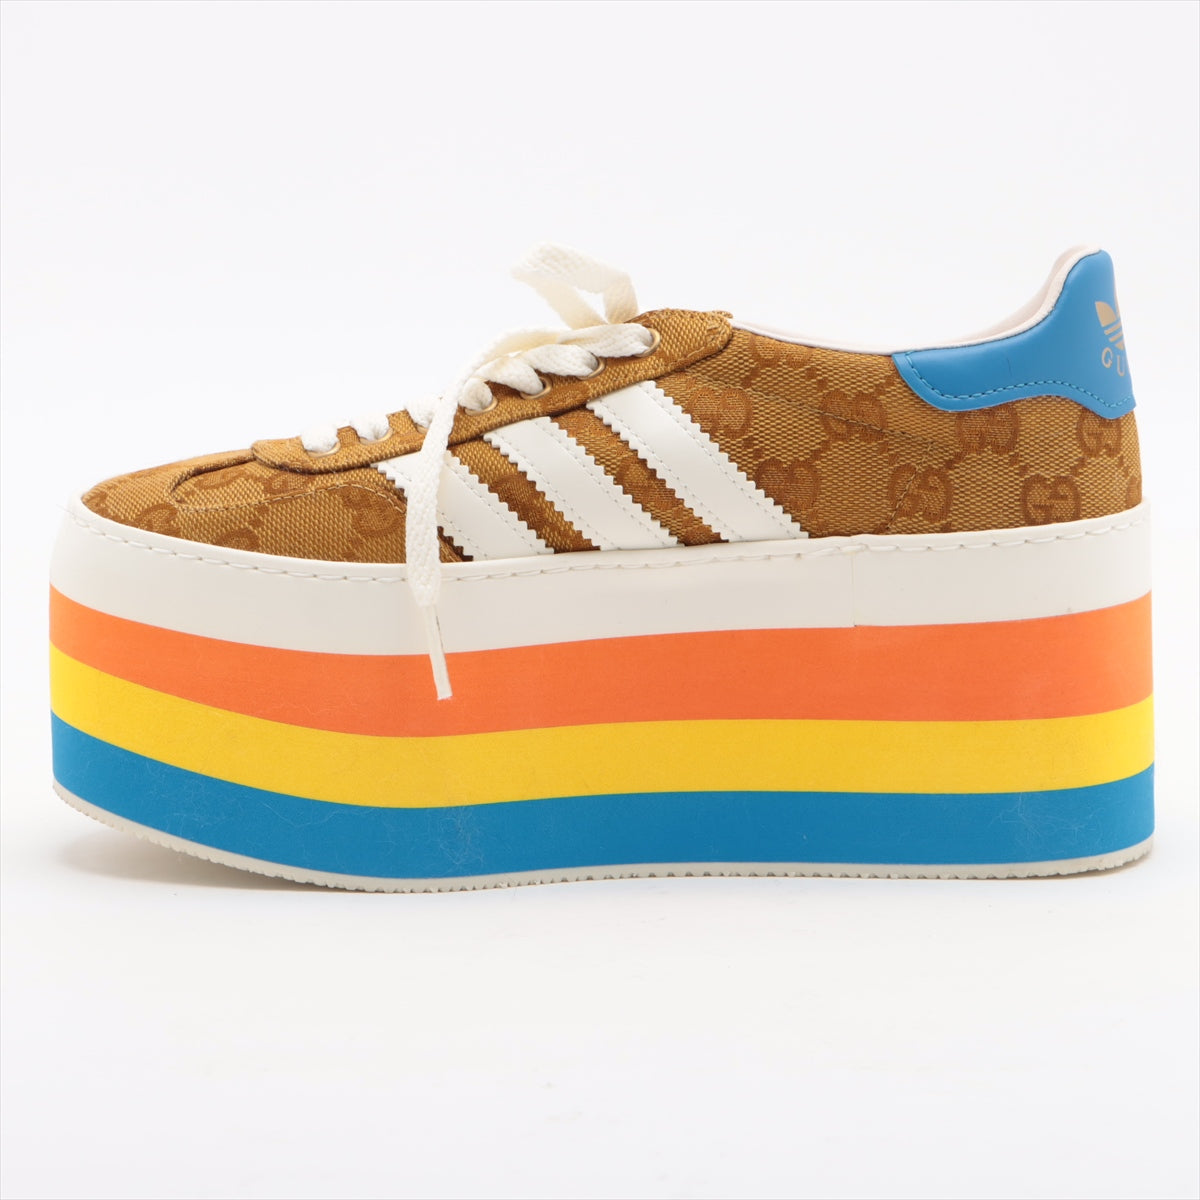 Gucci x adidas Leather x fabric Sneakers 21.5cm Ladies' Multicolor HQ7085 GAZELLE Midsole cracked There is hair adhering